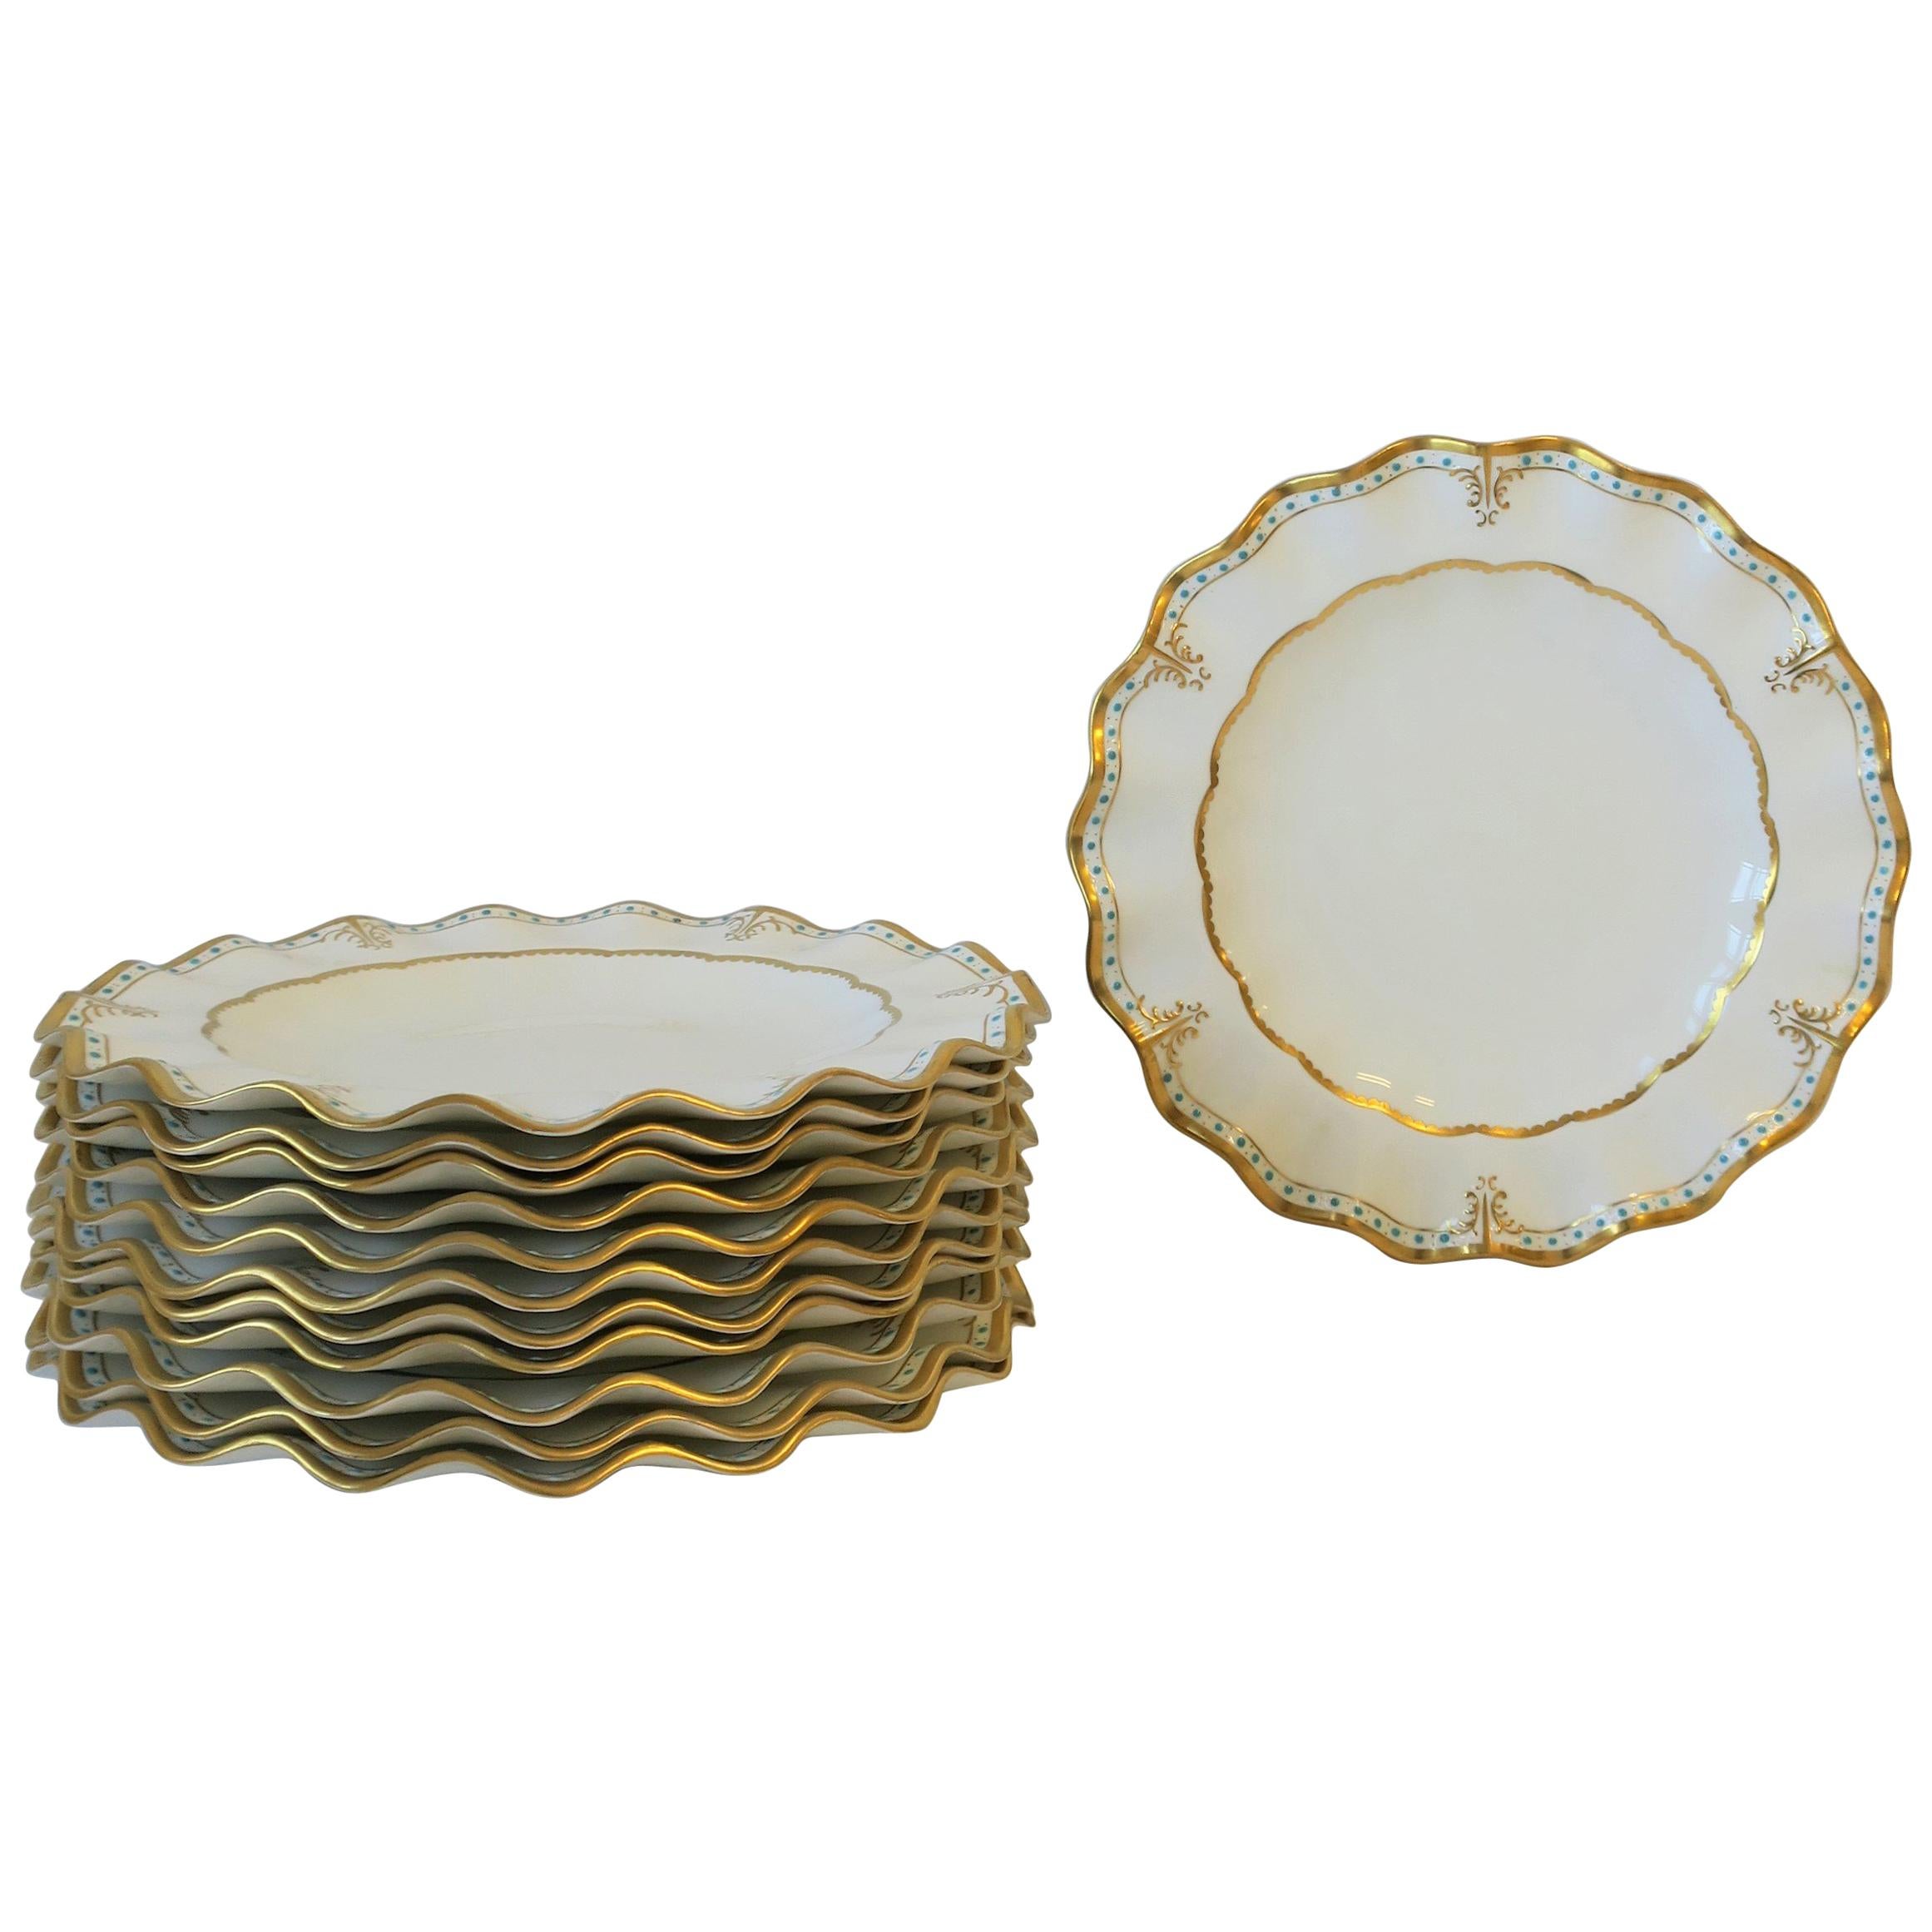 English Royal Crown Derby Porcelain Dinner Plates in White and Gold, Set of 12